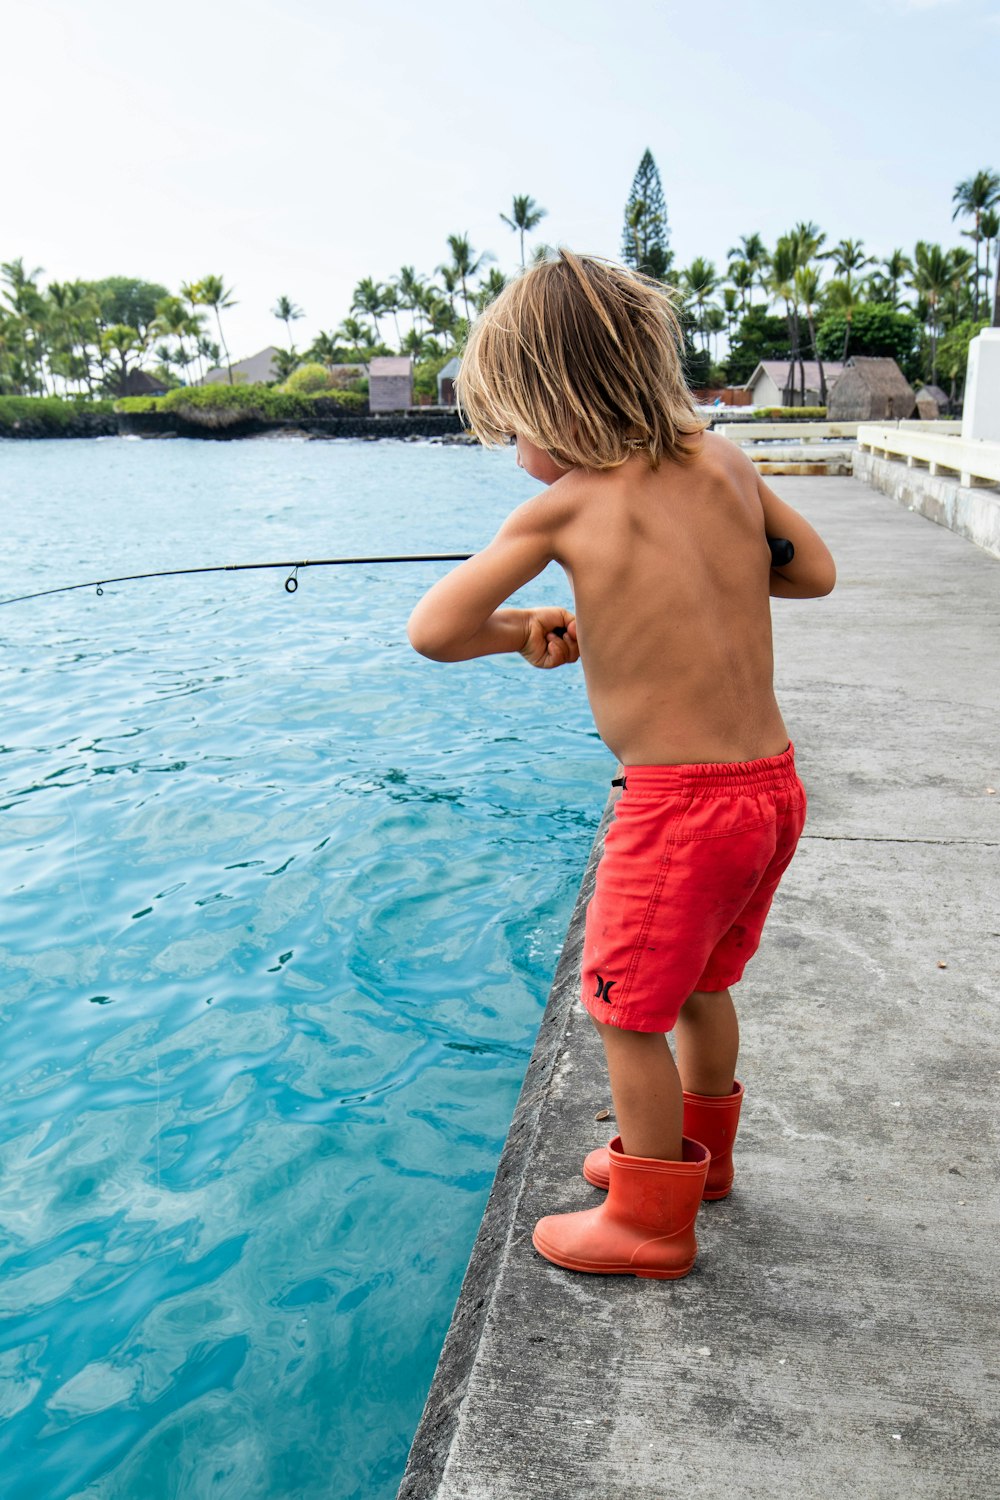 a young boy fishing in a pool of water